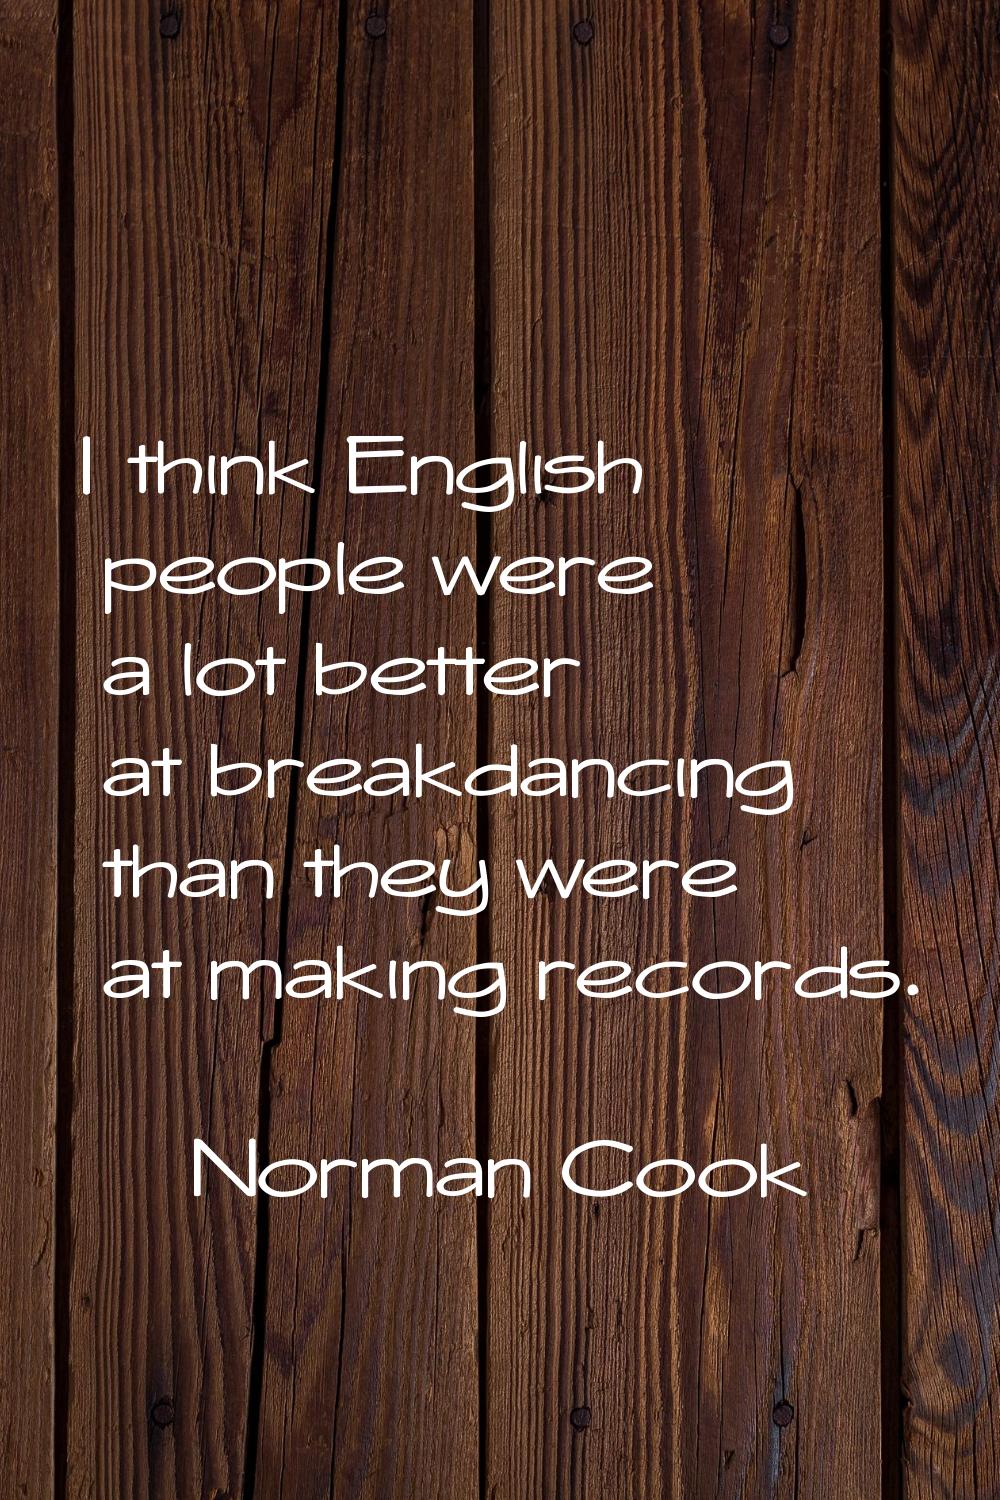 I think English people were a lot better at breakdancing than they were at making records.